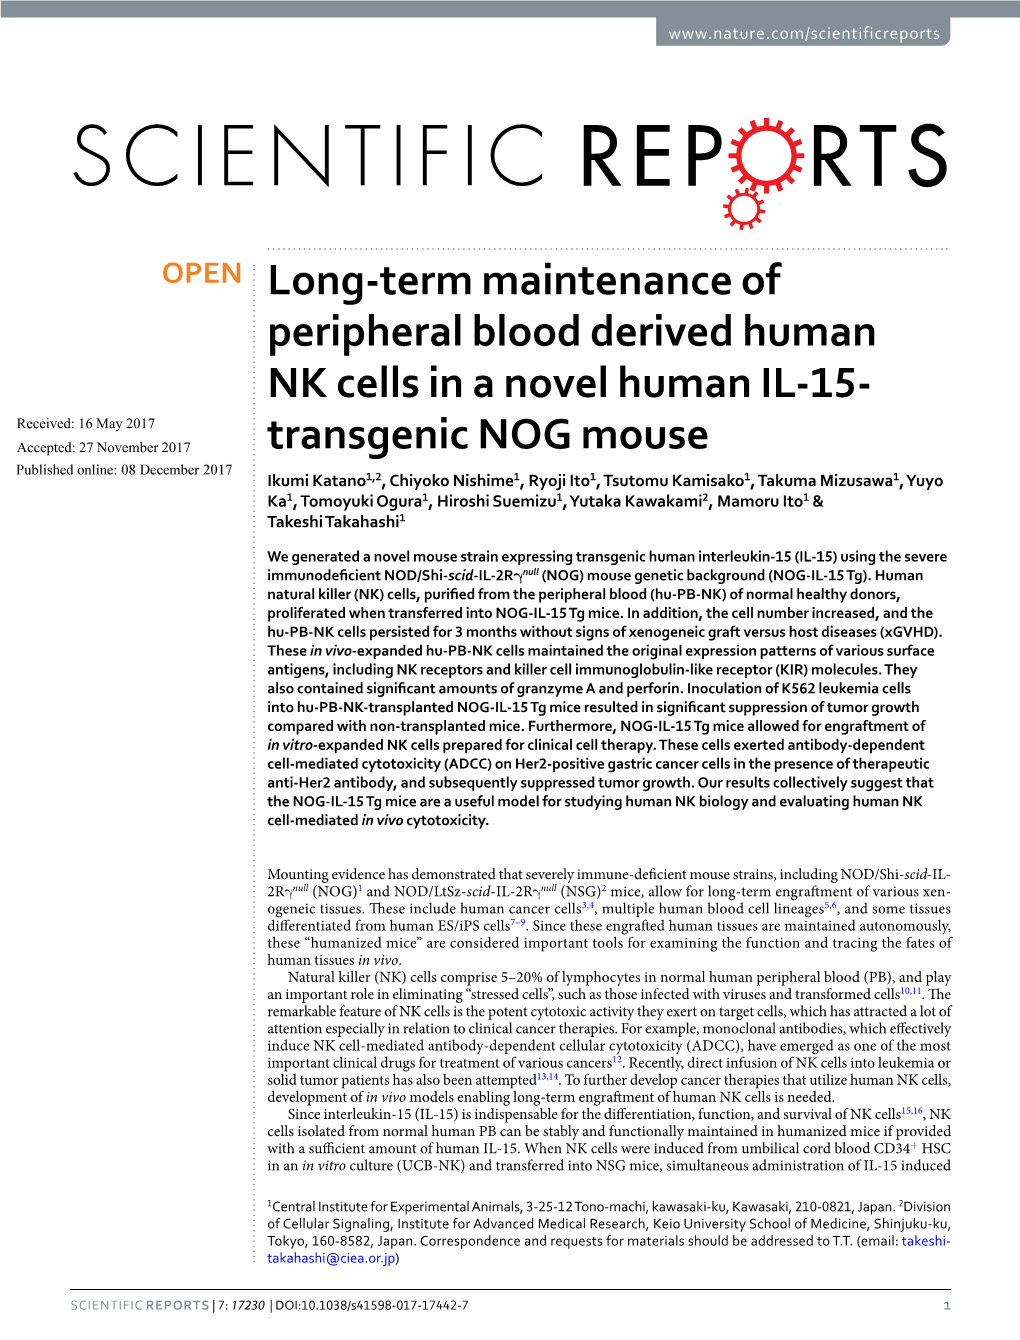 Long-Term Maintenance of Peripheral Blood Derived Human NK Cells in A